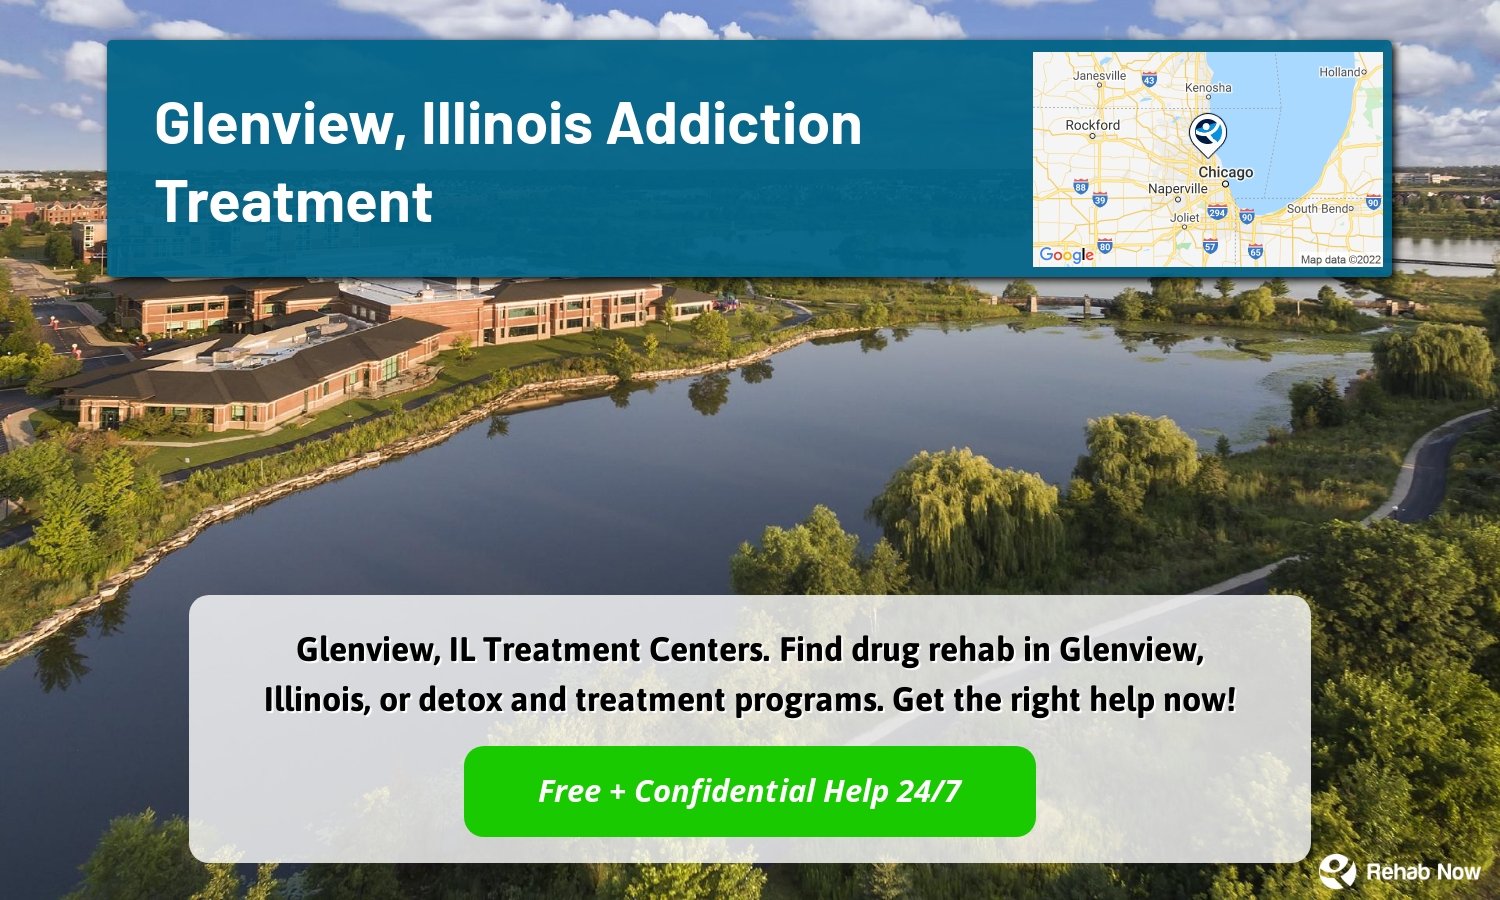 Glenview, IL Treatment Centers. Find drug rehab in Glenview, Illinois, or detox and treatment programs. Get the right help now!